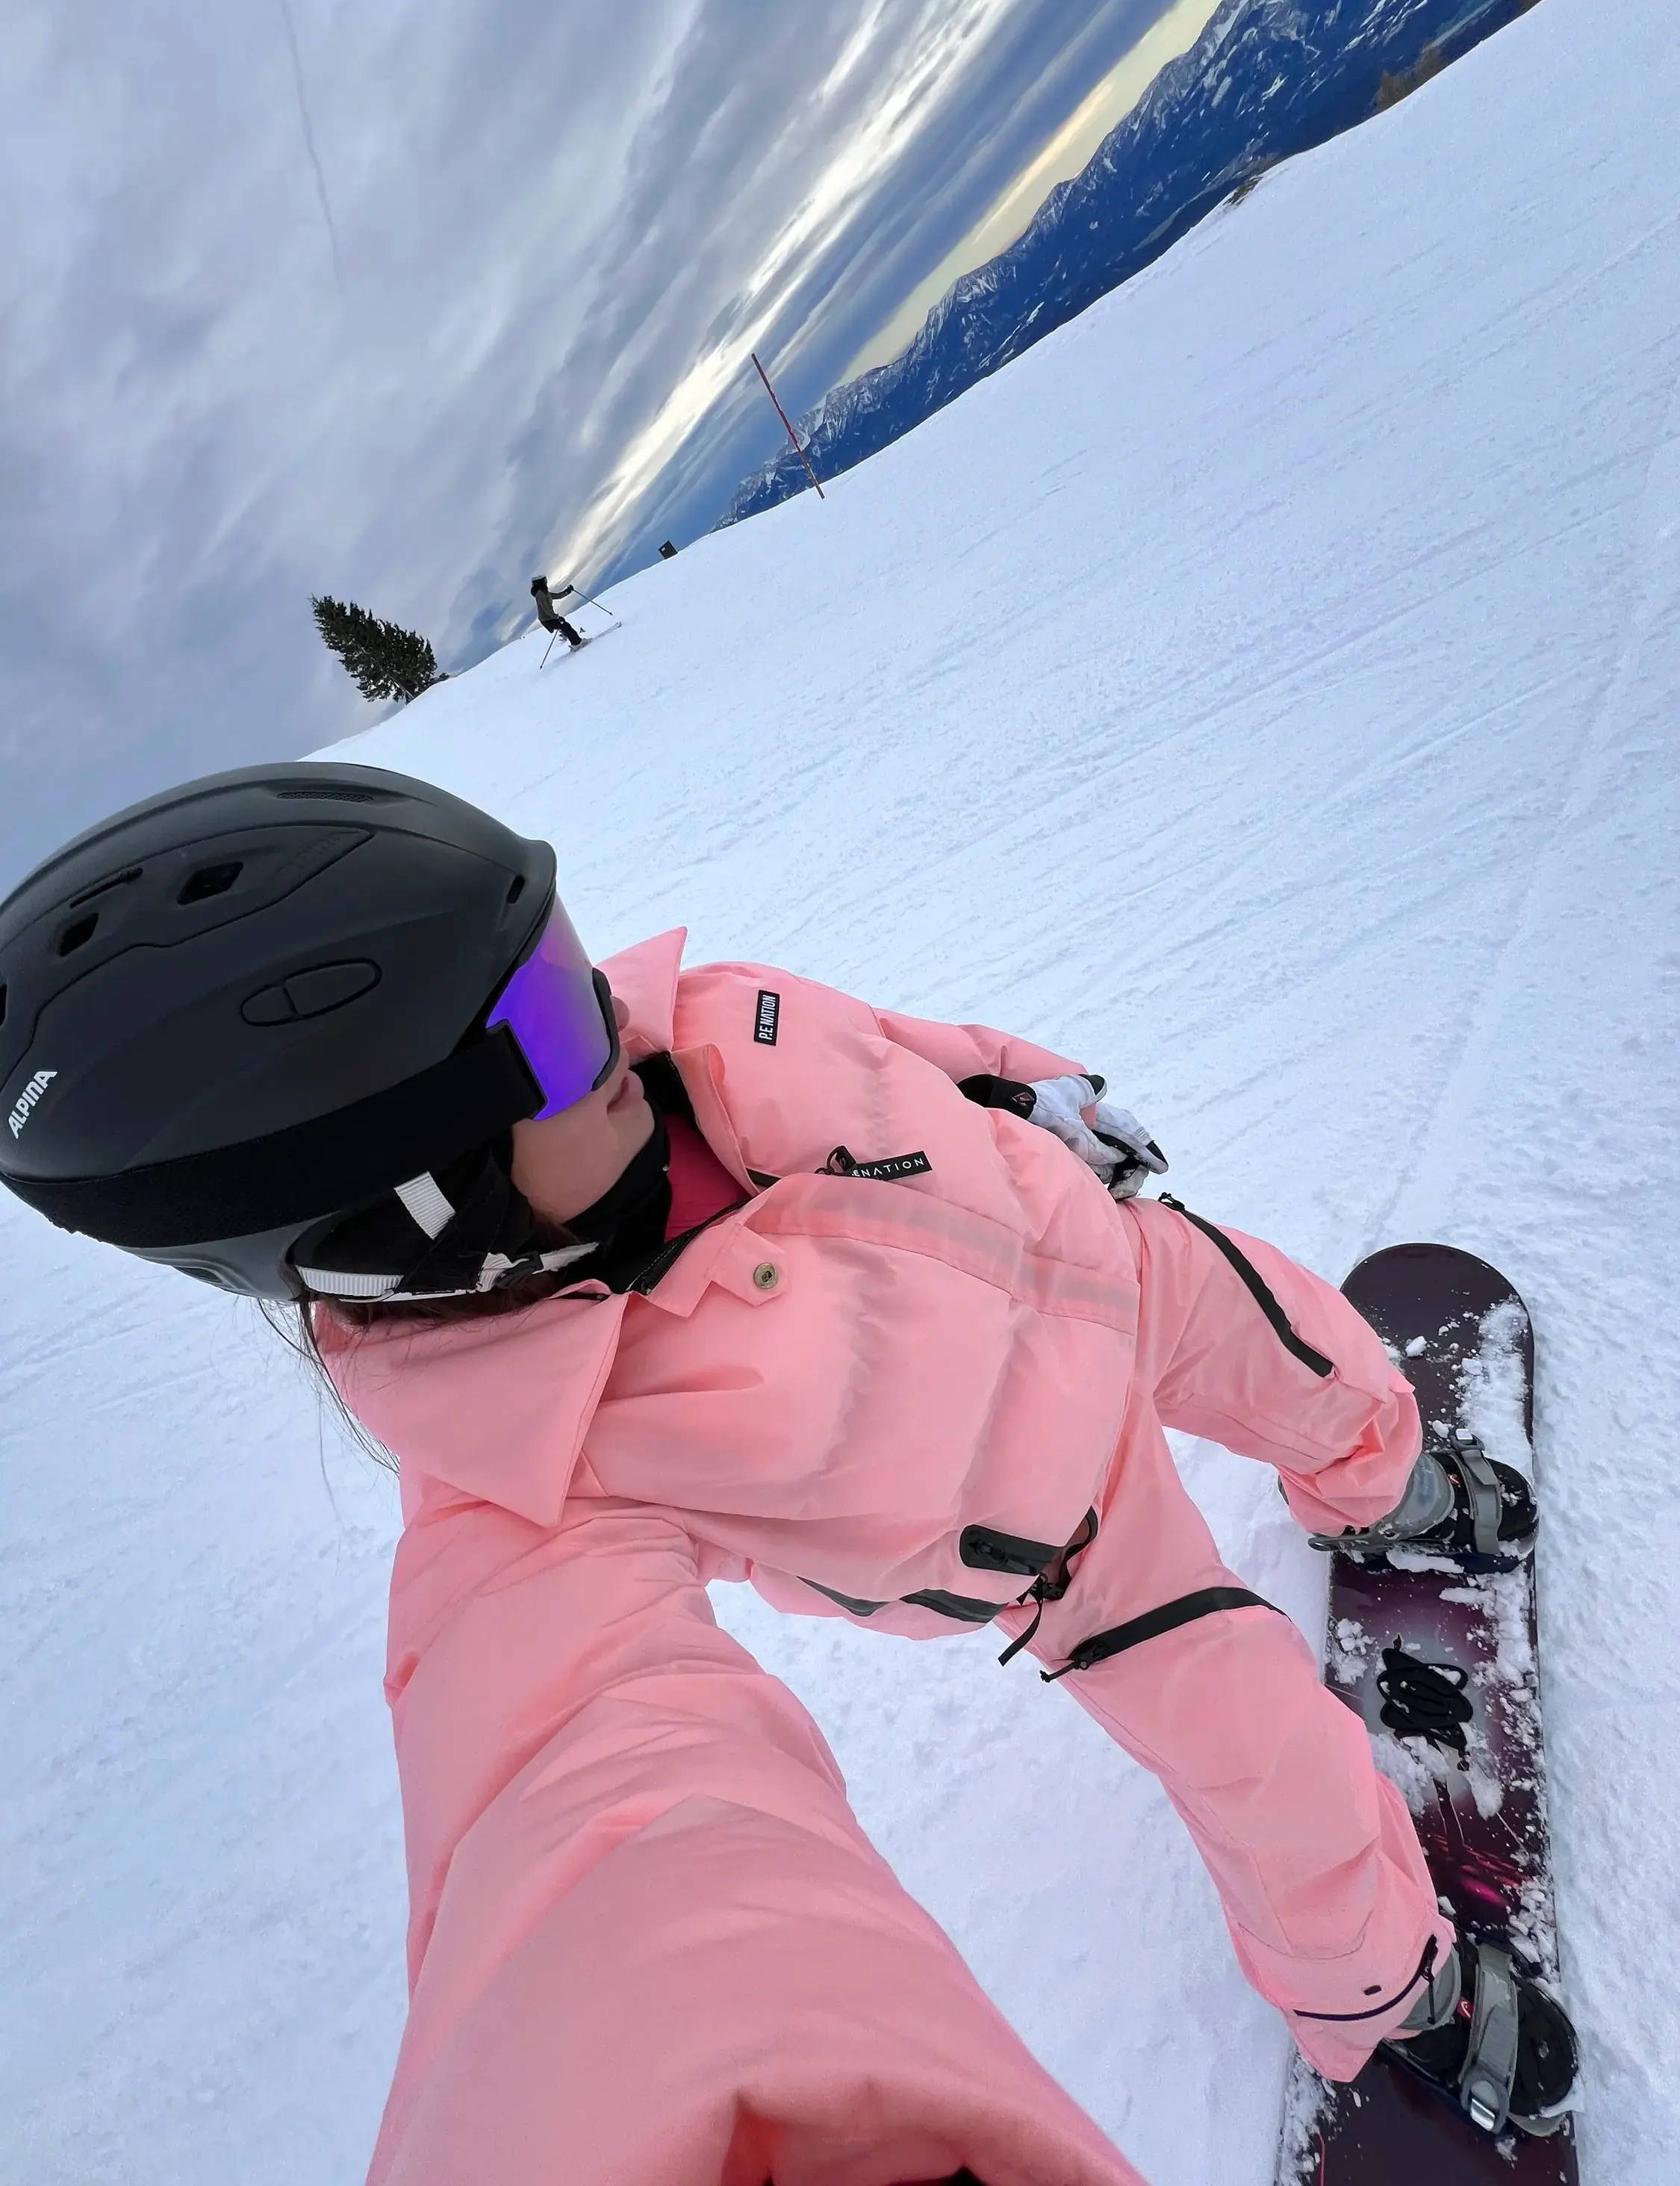 Girl wearing a pink ski suit, she is snowboarding